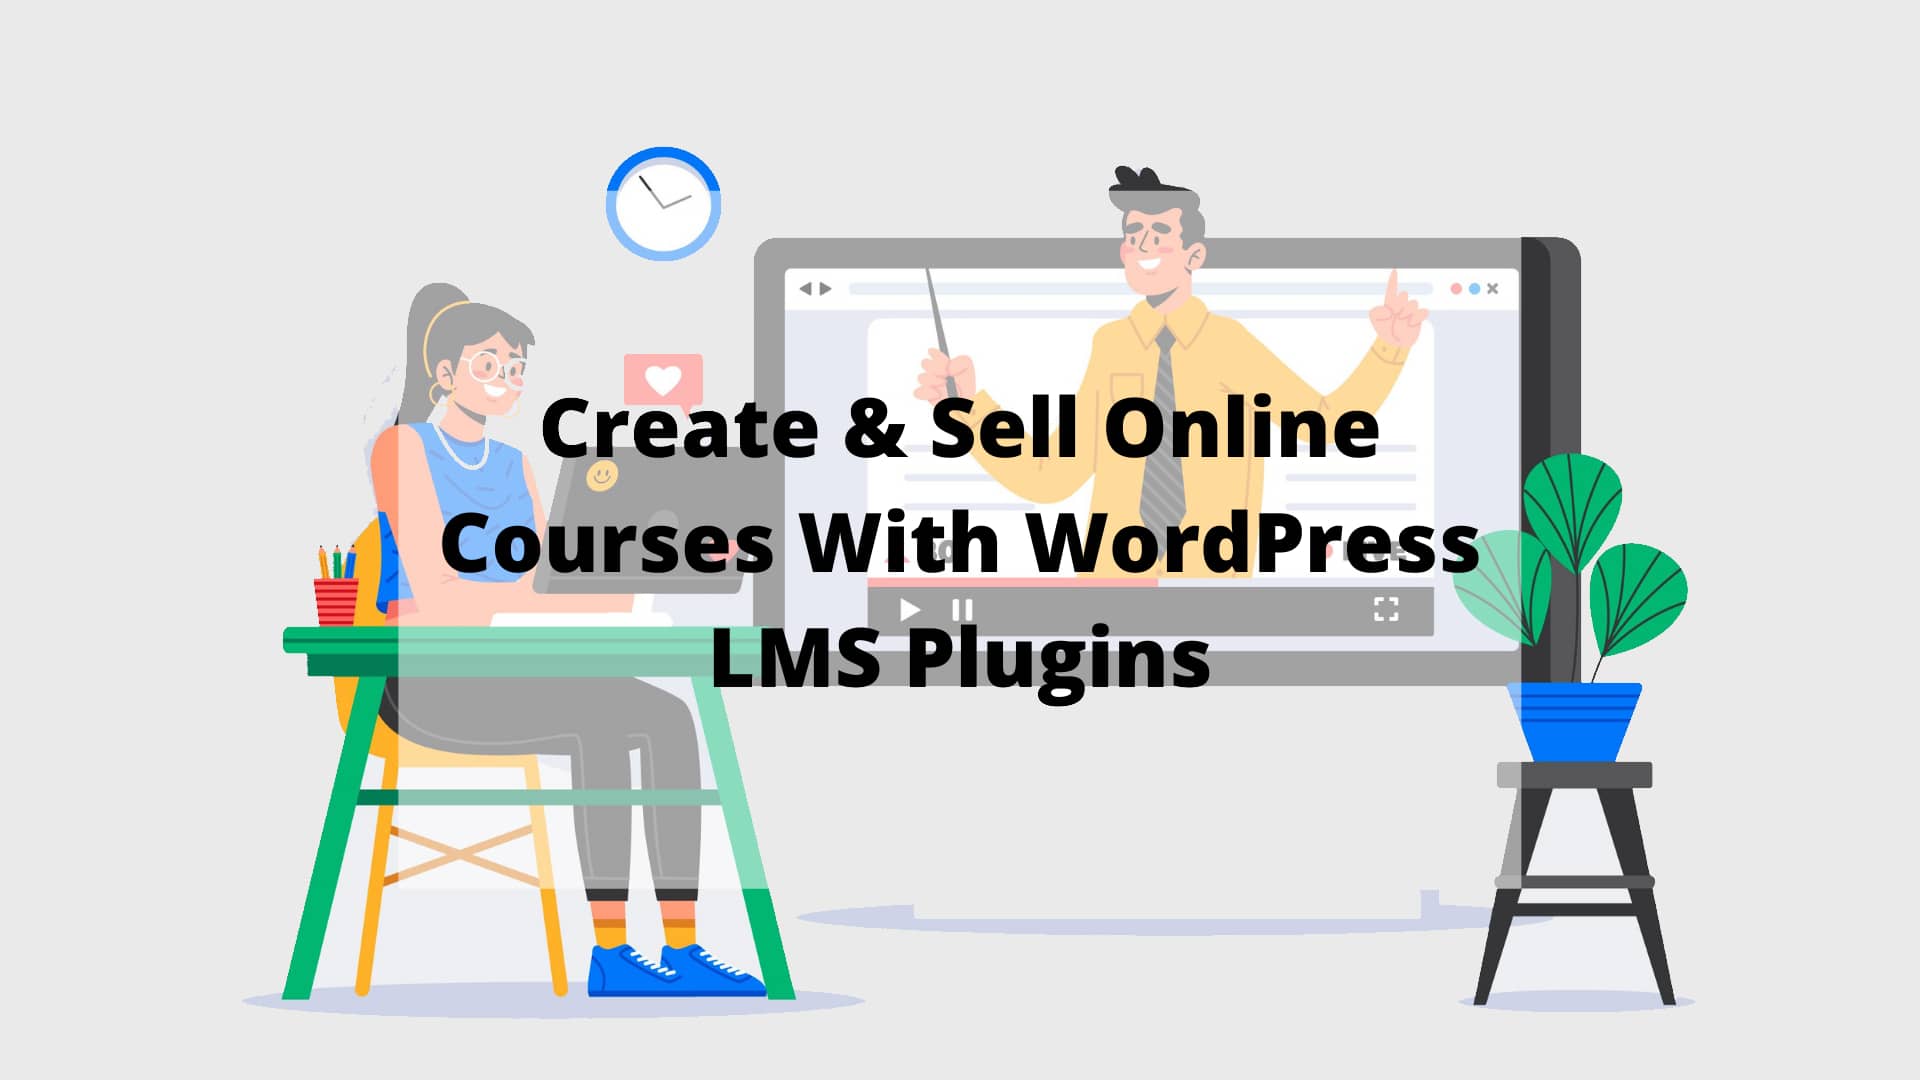 Top 6 WordPress LMS Plugins to Create and Sell Online Courses in 2022?